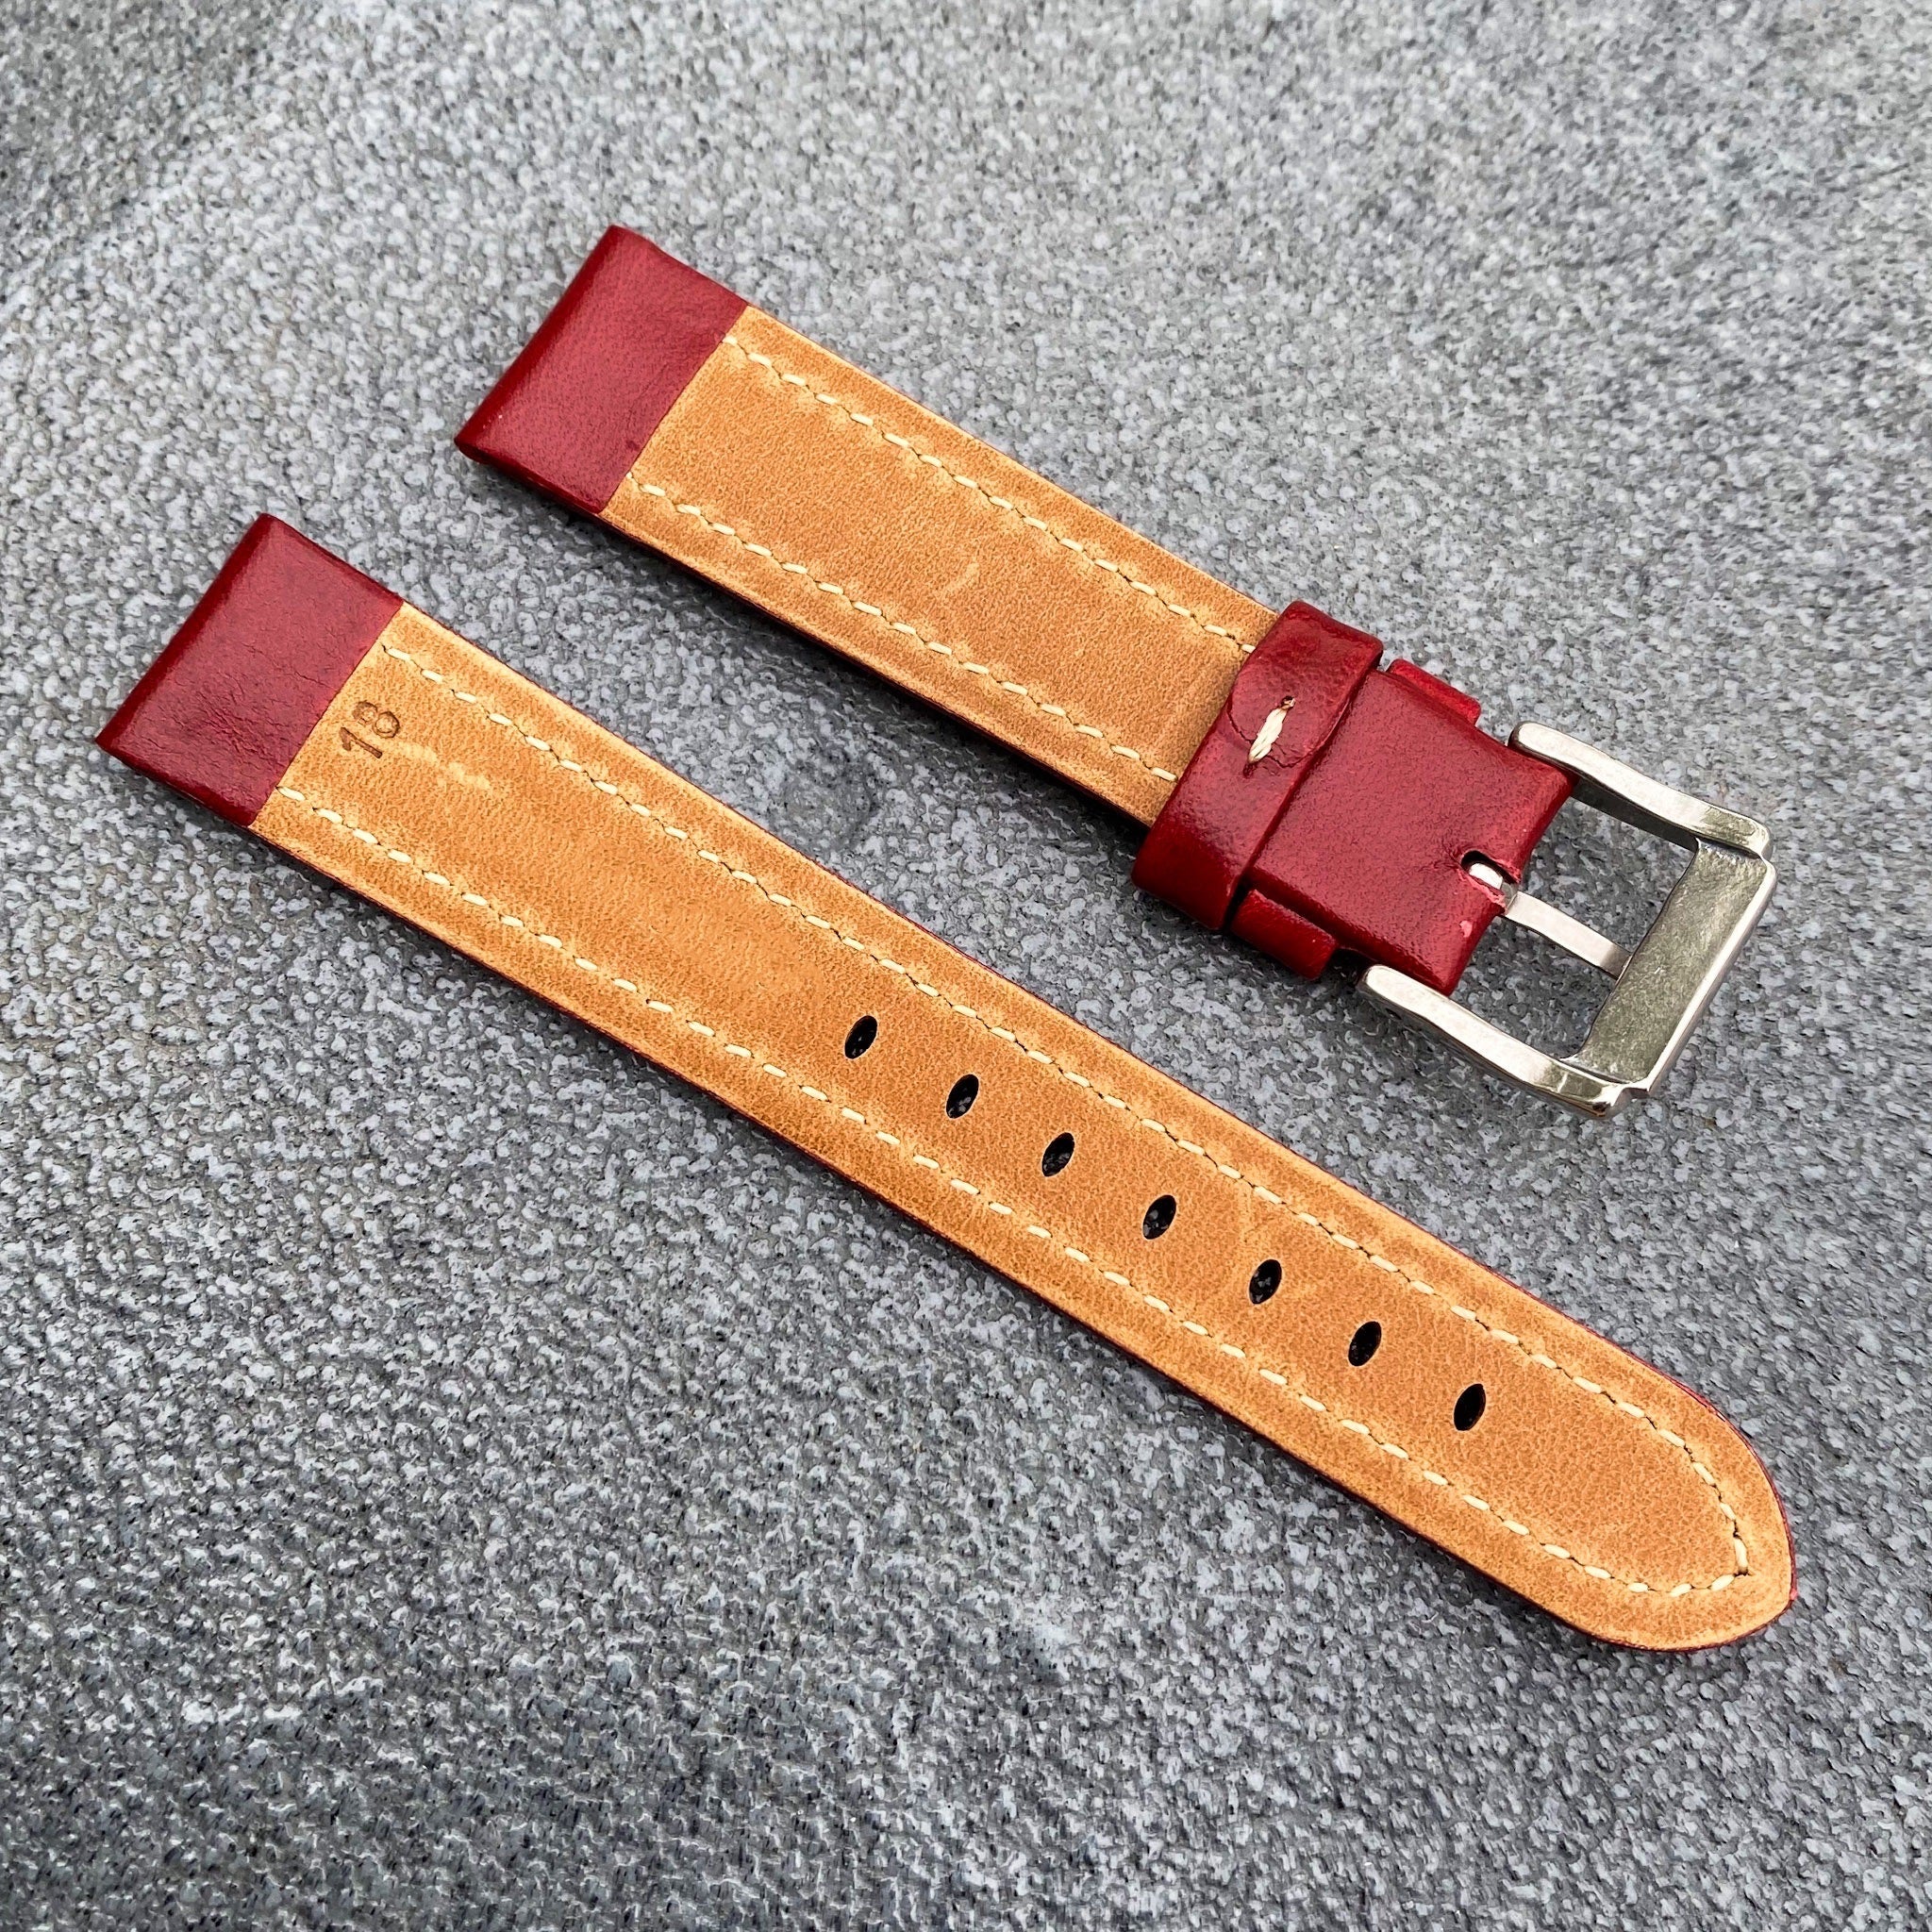 (Kyoto Series) 18mm/20mm/22mm Red Handcraft French Calfskin Leather Watch Strap w/White Stitching - Samurai Vintage Co.